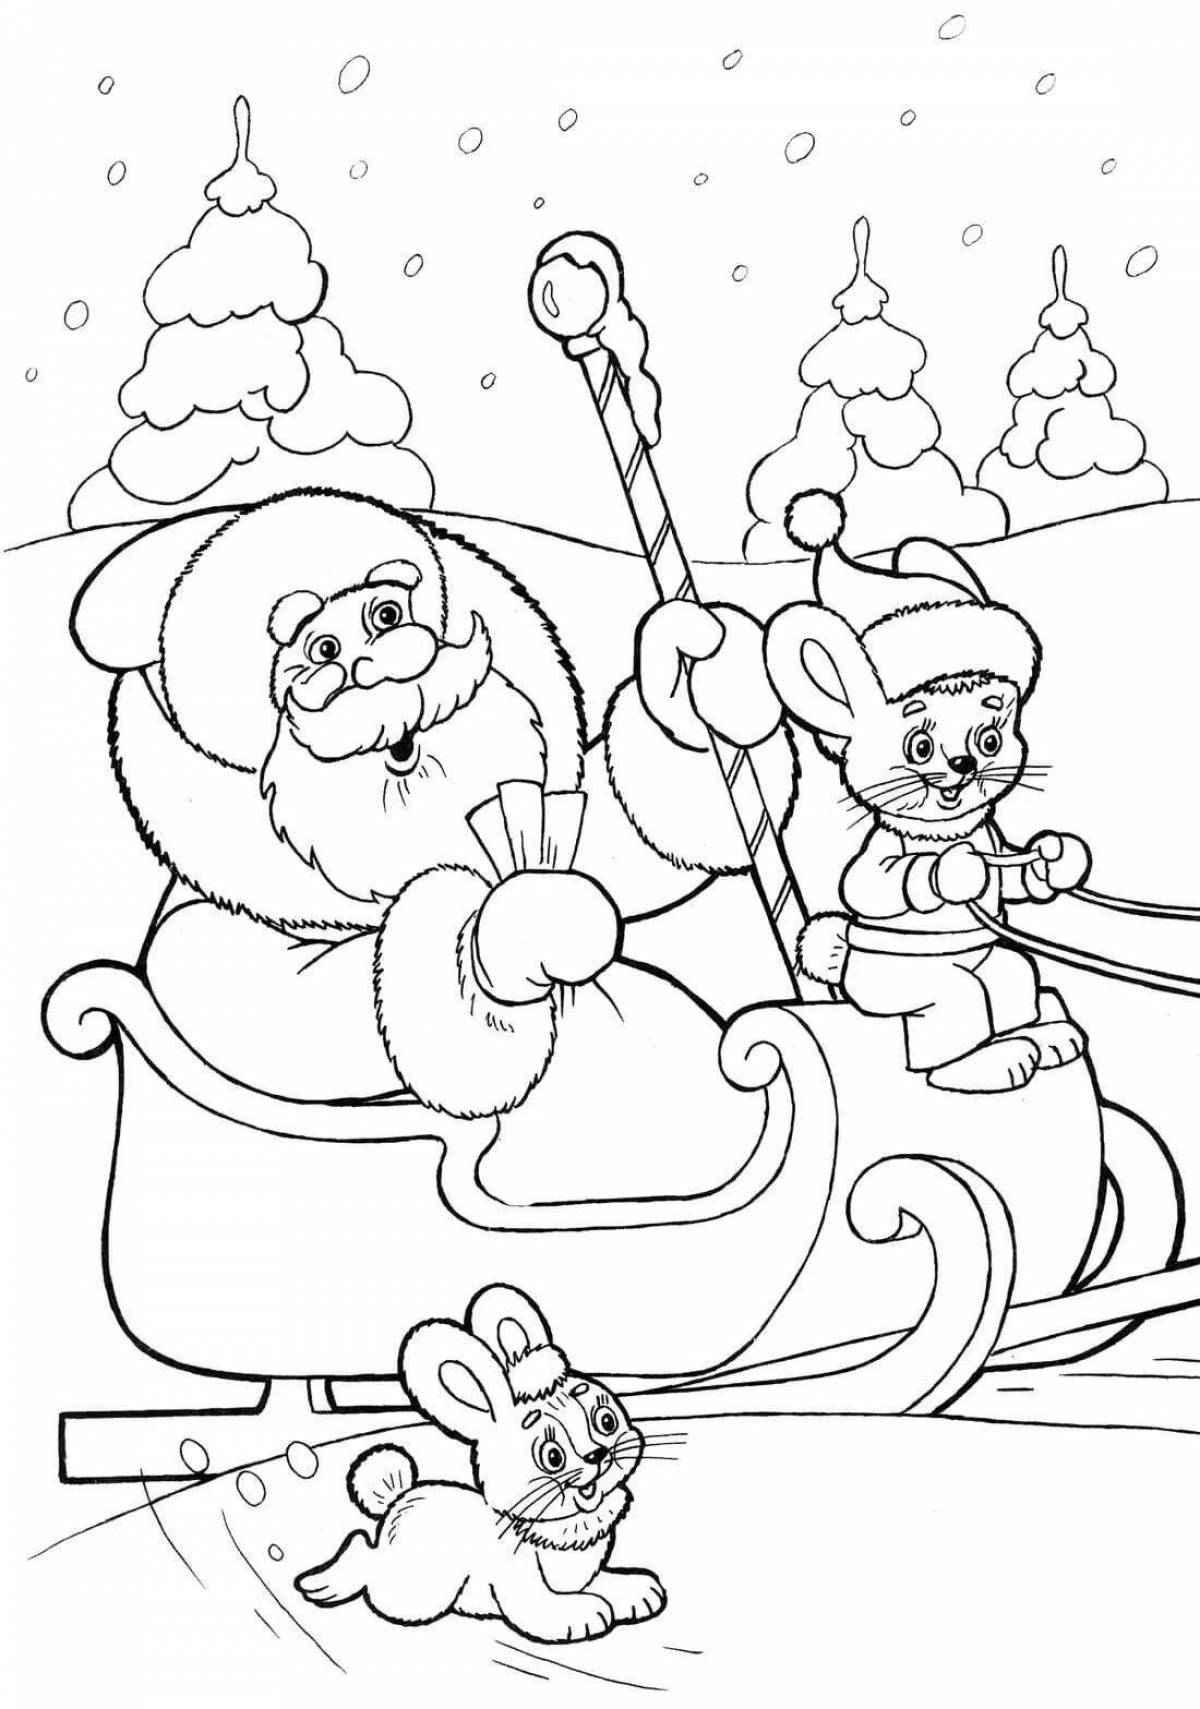 Coloring page adorable santa claus on sleigh